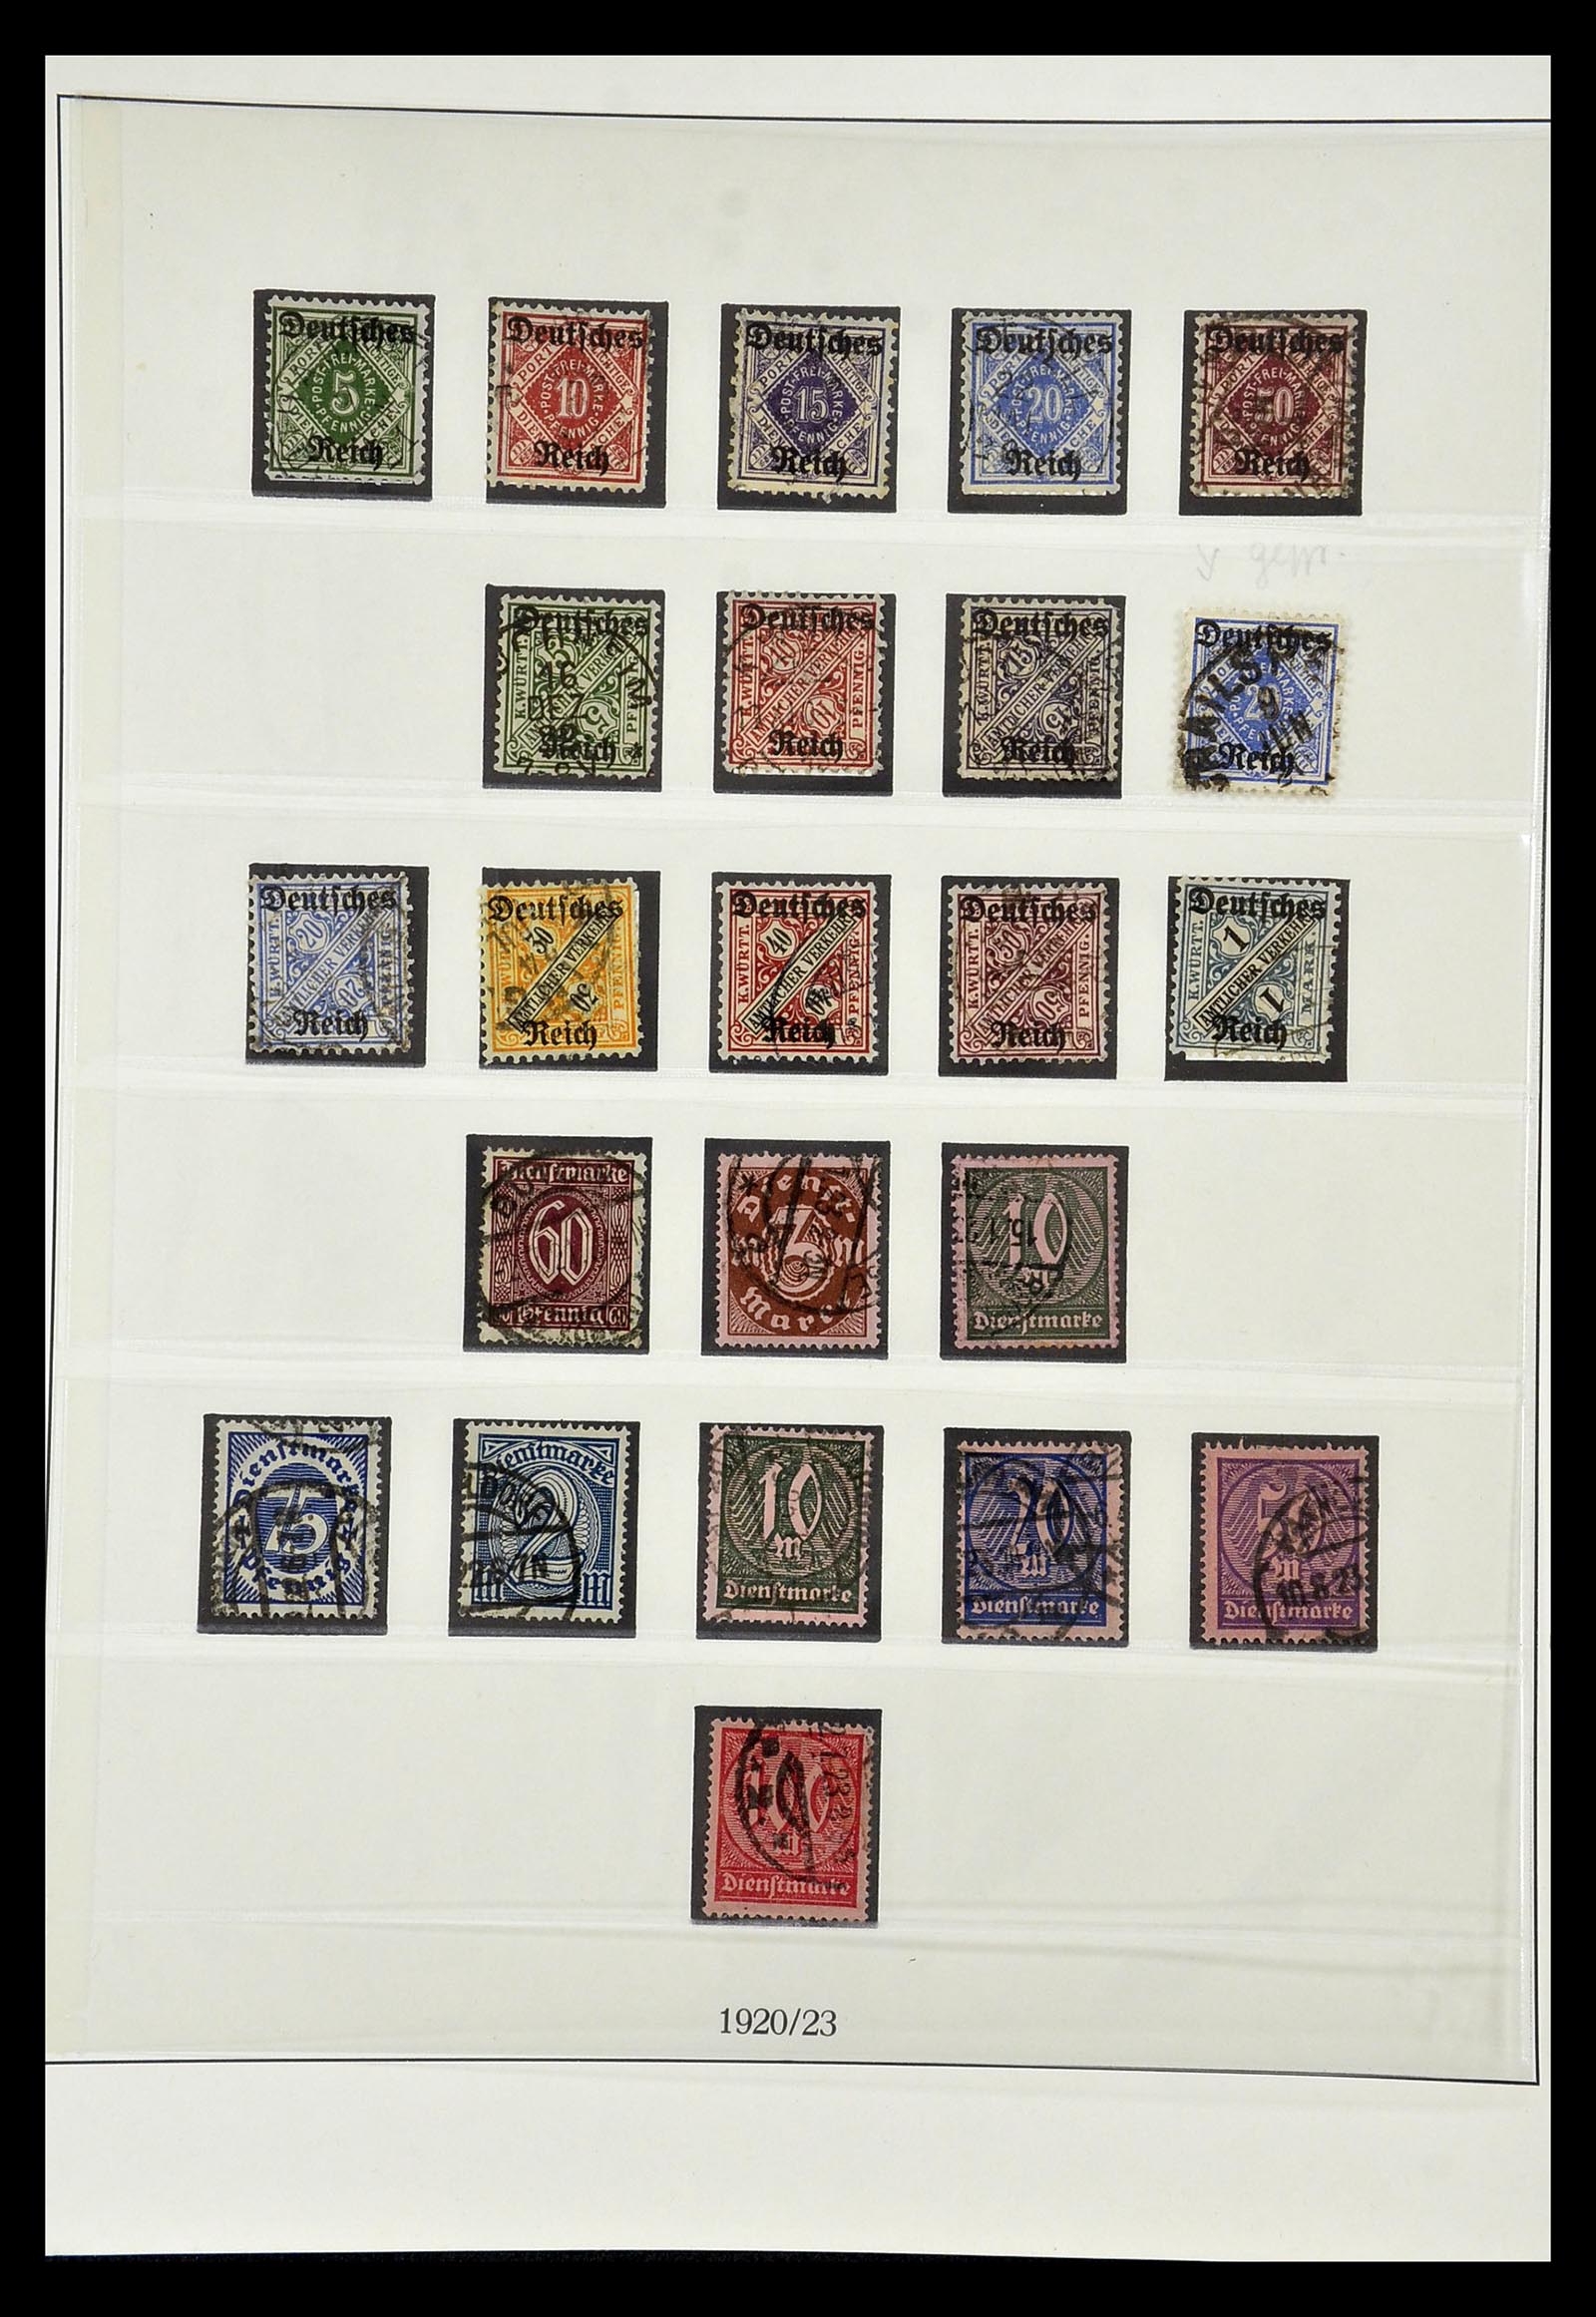 35016 005 - Stamp Collection 35016 Duitse Rijk service stamps 1903-1942.